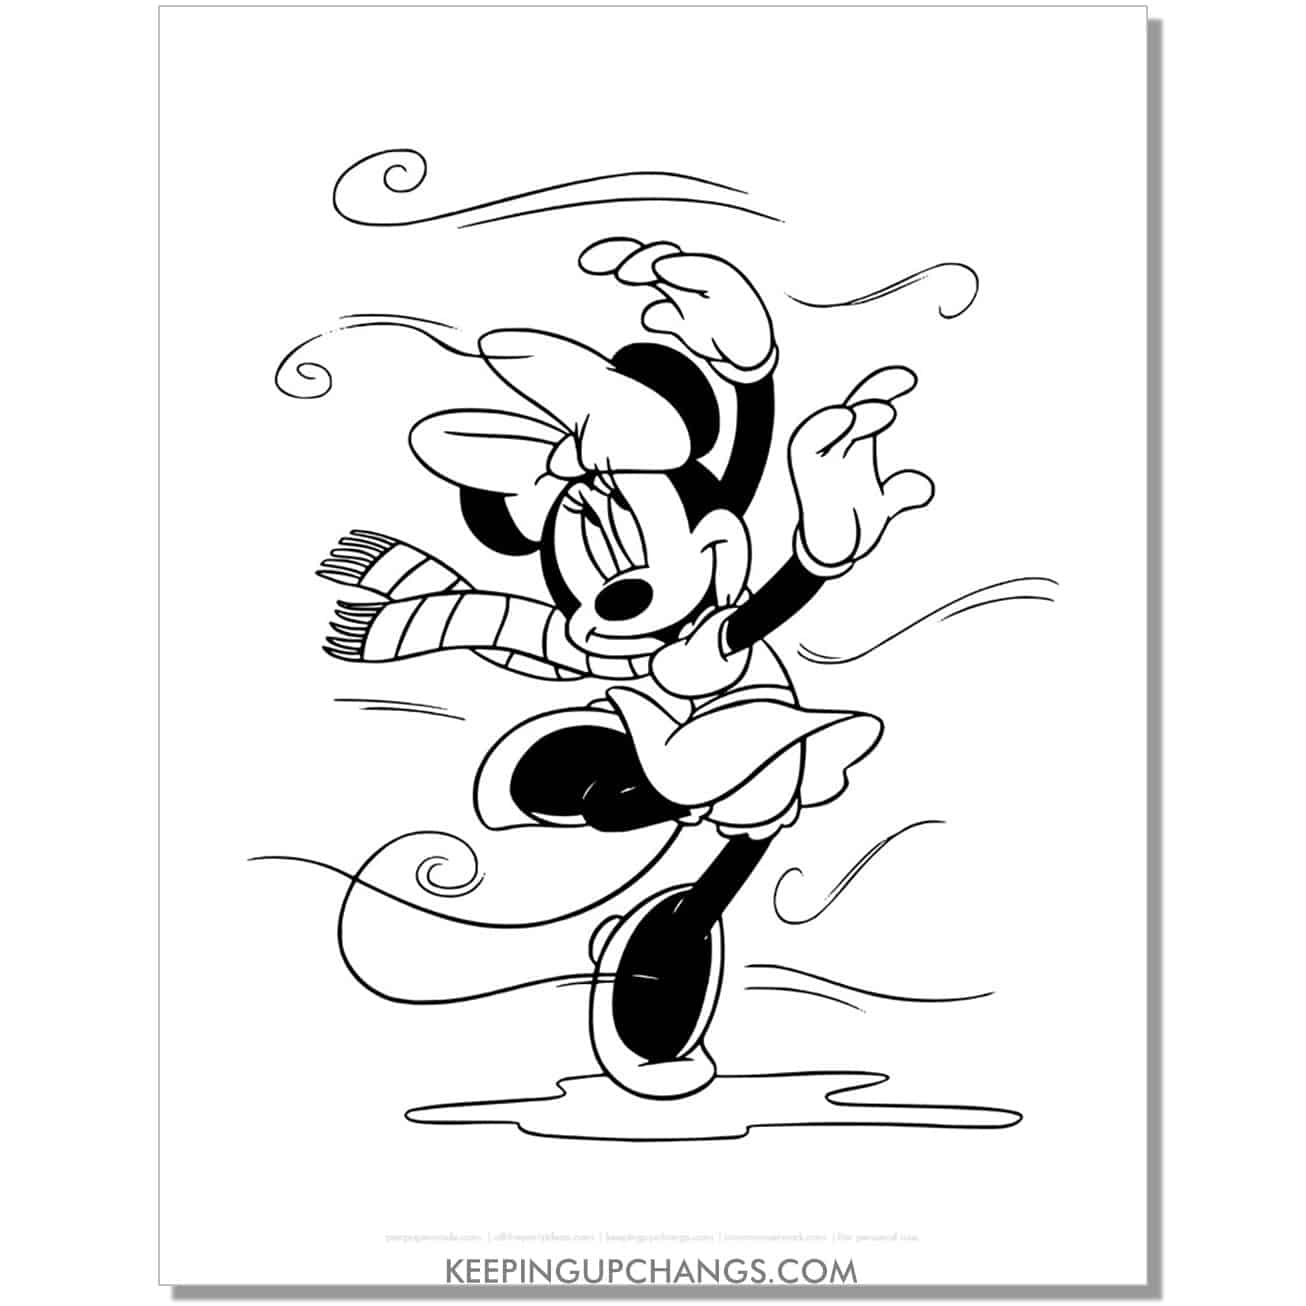 free minnie mouse does ballerina move in snow coloring page, sheet.